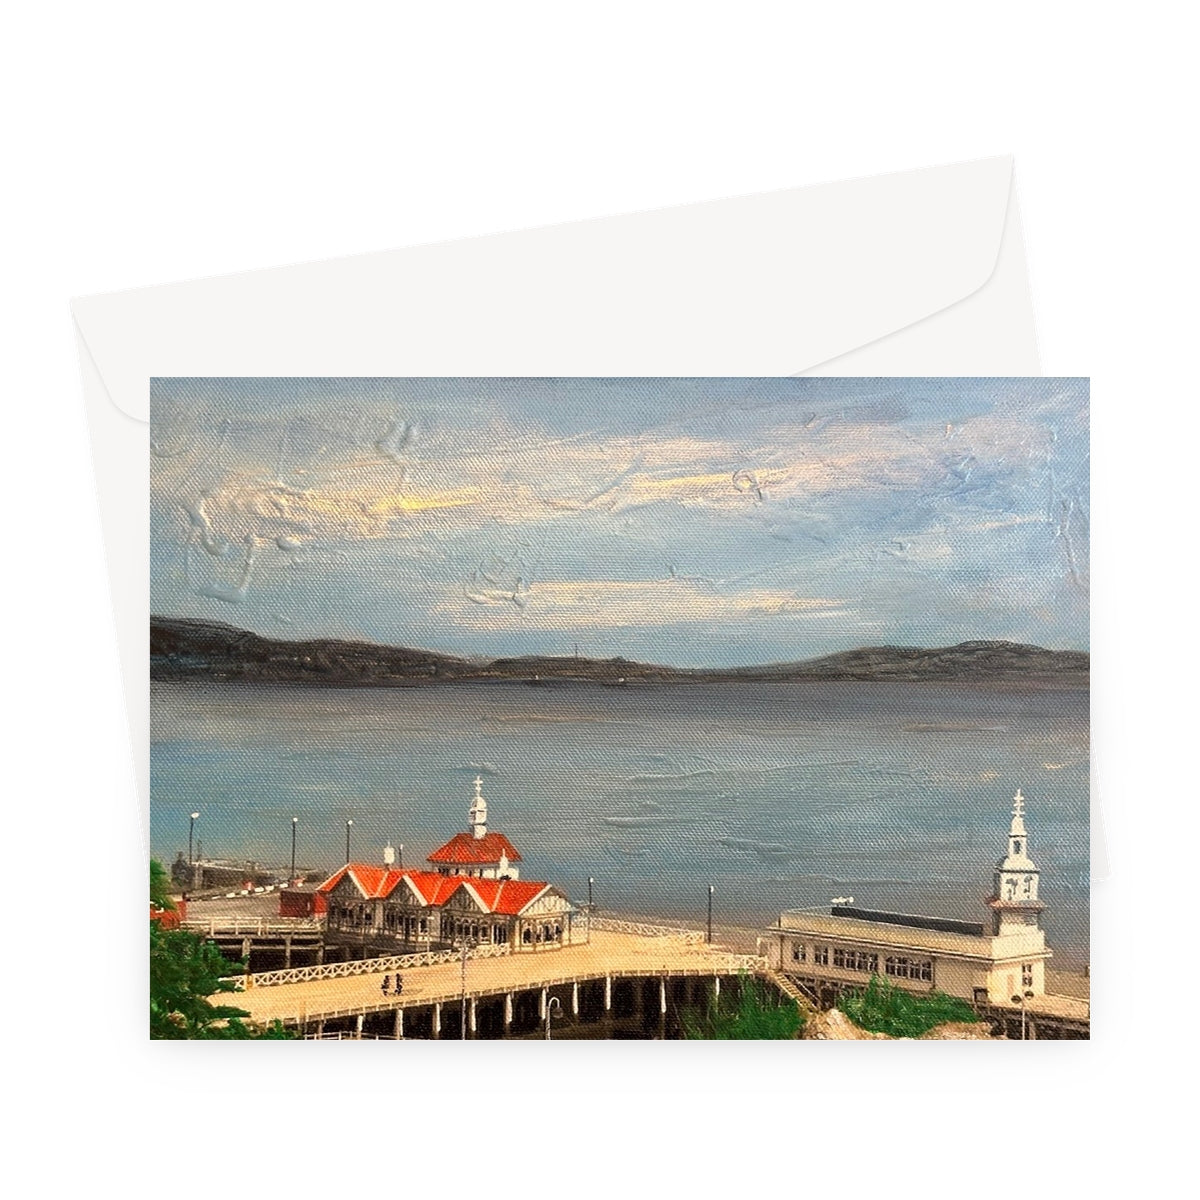 Looking From Dunoon Art Gifts Greeting Card-Greetings Cards-River Clyde Art Gallery-A5 Landscape-1 Card-Paintings, Prints, Homeware, Art Gifts From Scotland By Scottish Artist Kevin Hunter